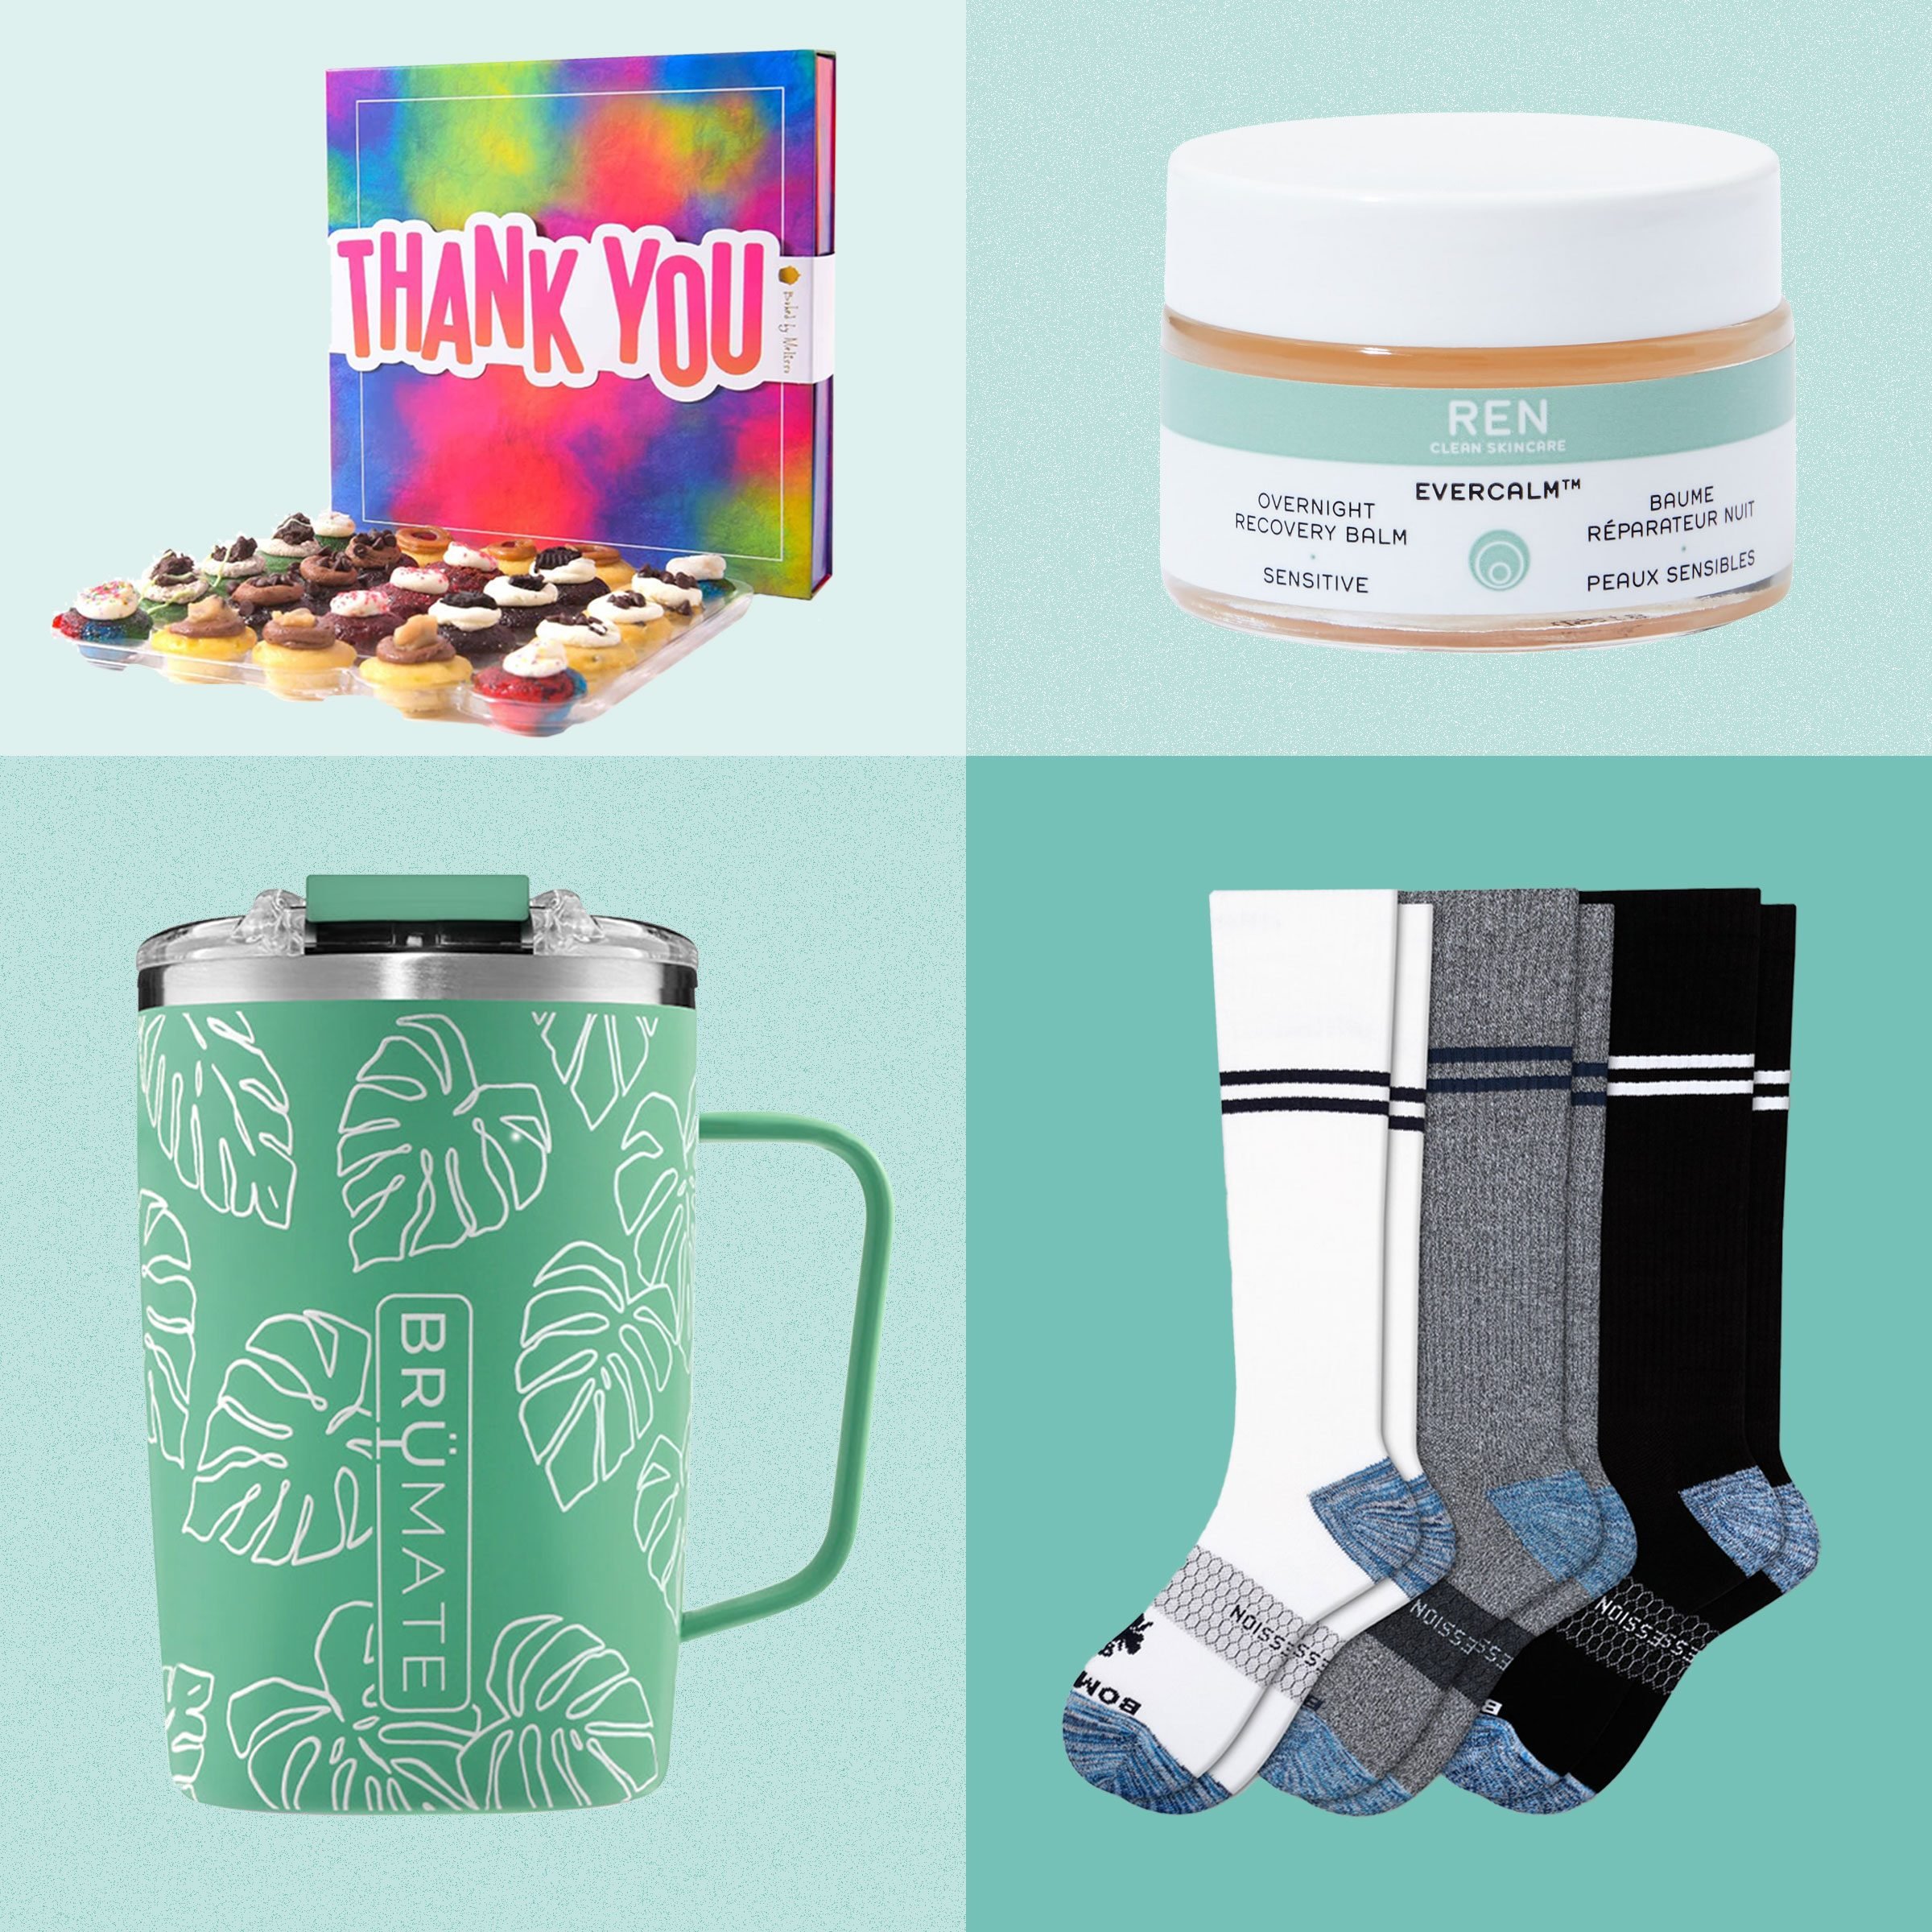 19+ Clever Ideas For Personalized Nurse Gifts - 64Hydro